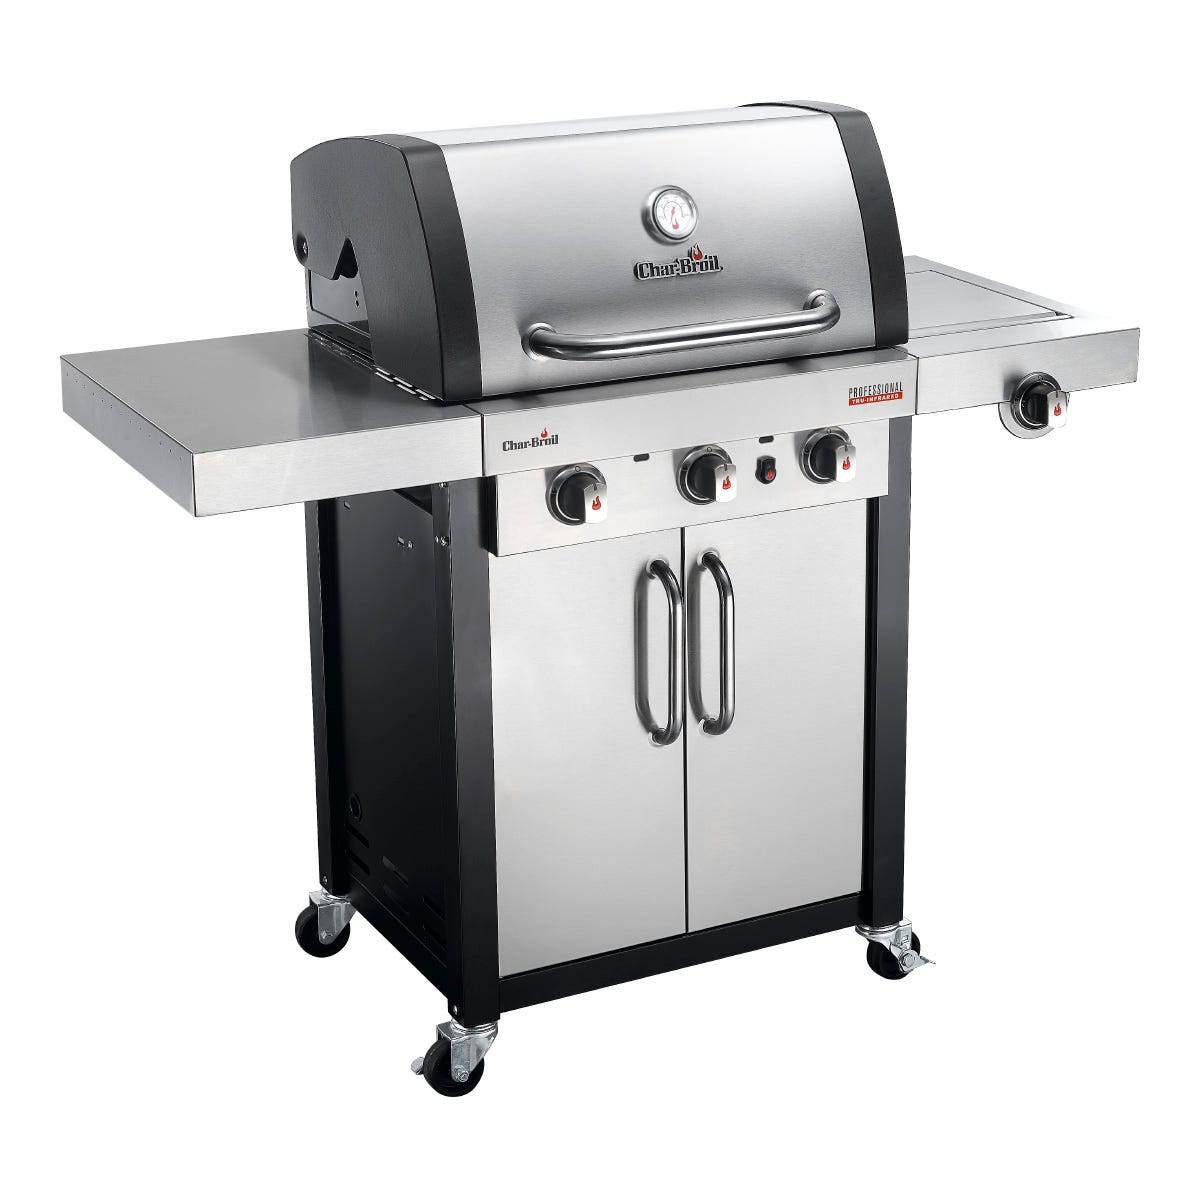 Char-Broil Professional 3400S 3 Burner Gas BBQ - Stainless Steel